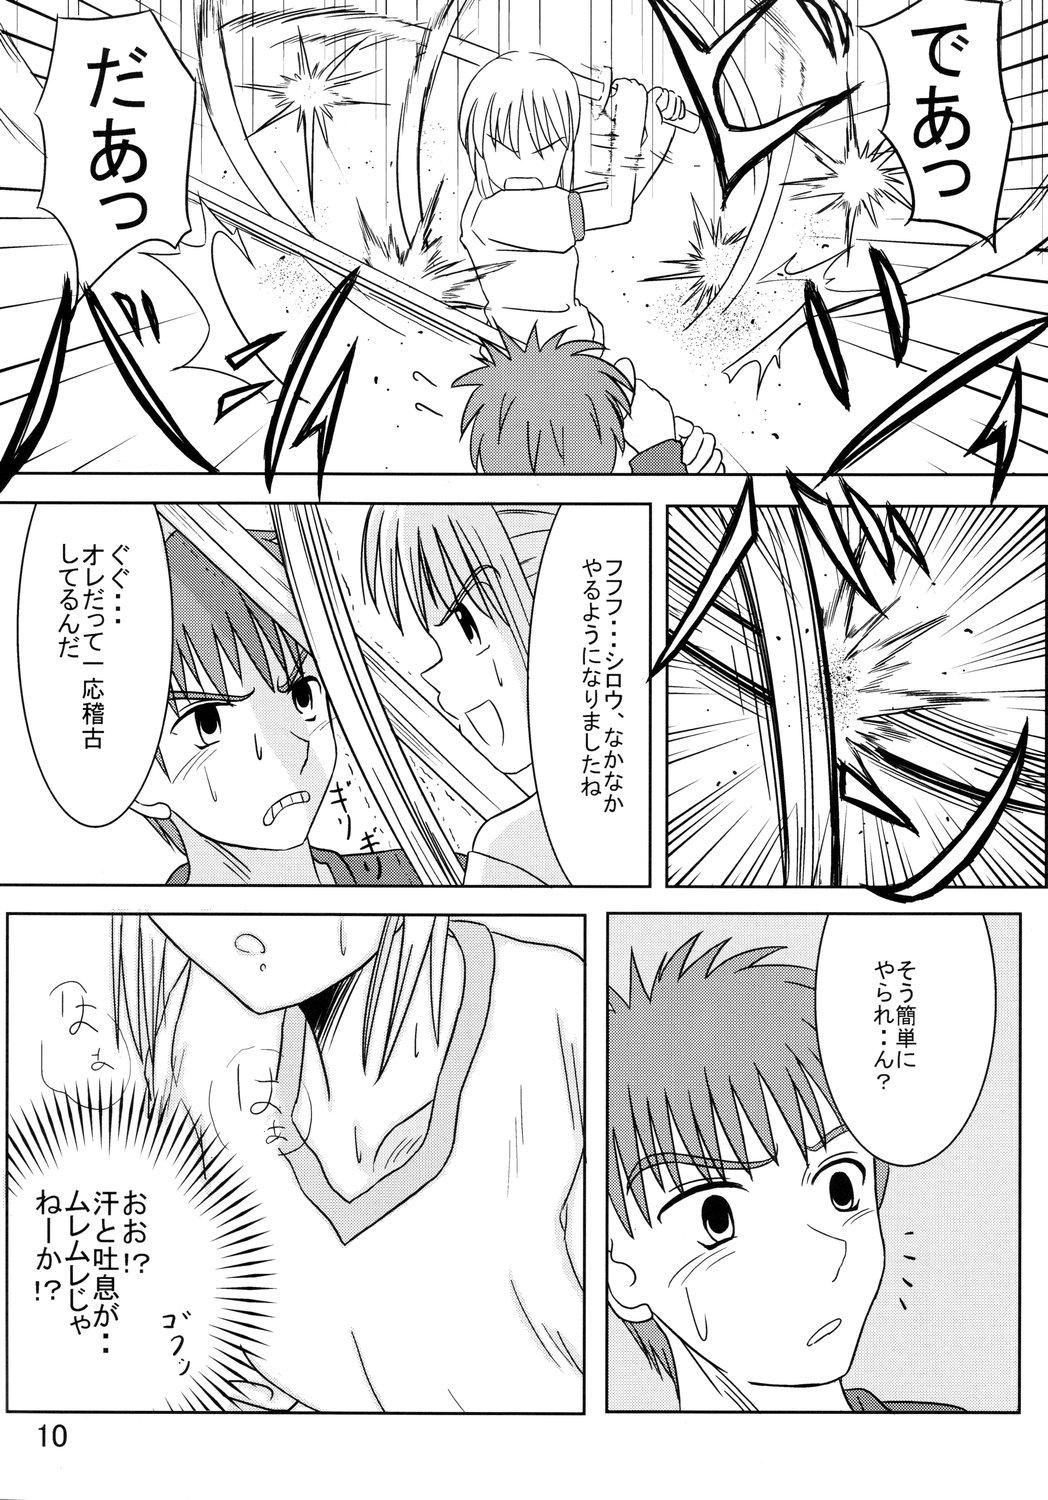 Teenxxx Saber Of Sanity - Fate stay night Handjobs - Page 9